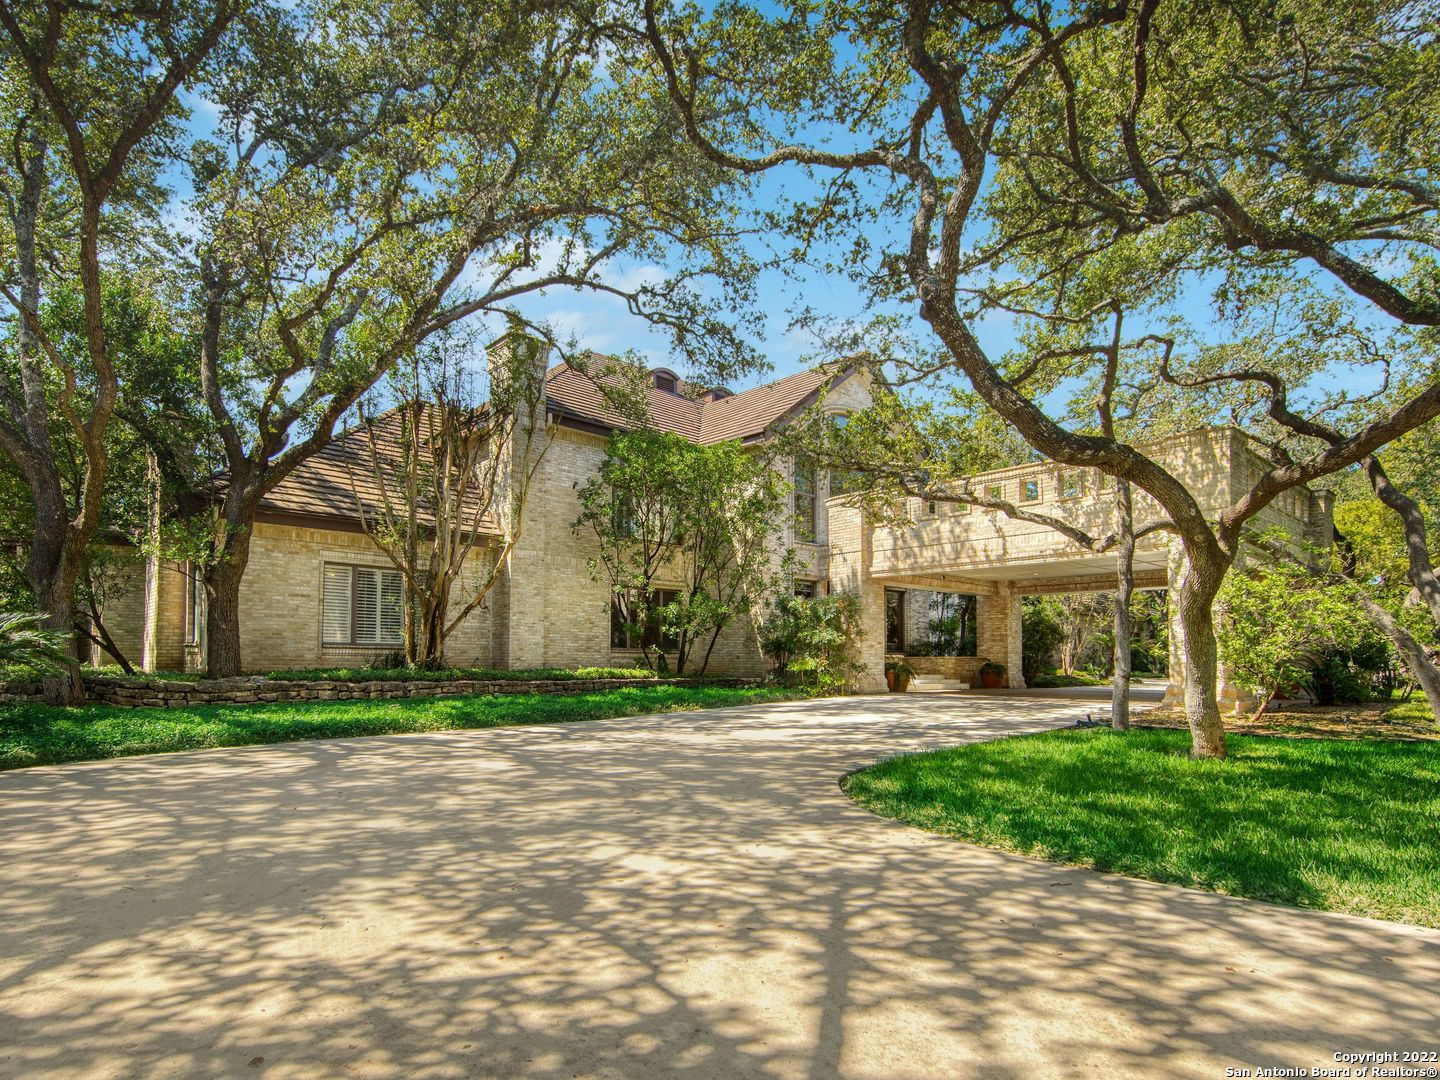 Hidden within the quiet community of Hill Country Village and behind the formidable gated entry connected to high walled perimeter is the expansive 6.81 acres of over 300 hundred mature oaks that cover this uniquely peaceful property. Distinctive design replete with exceptional elements. Superior craftsmanship and only the finest appointments found in the main home including the walls of windows illuminating the interiors revealing exquisite solid wood millwork throughout, custom ceiling details and chef's kitchen complete with custom cabinetry coupled with large Brazil-mined rare quartzite island. Relax in the oversized master retreat with a spa-like bath overlooking the backyard oasis. The remaining guest bedrooms found upstairs are spacious and luxe. Poised for large-scale entertaining a full prep kitchen with extensive cabinetry is found through the breezeway and features a fully equipped gym. Impeccable craftsmanship prevails with a detached casita complete with a large living room and kitchenette. A three-bedroom guest house is complete with extensive storage space, oversized living room space for guests, and a full kitchen with a kitchenette up. Escape to the palatial spread of the property and take relaxing walks amongst a park-like setting with a full sports court and playground with a custom-built treehouse. A sparkling pool and spa with full summer kitchen nearby make this an entertainer's dream. A true outdoors oasis with pristine landscaping blending naturally into the surroundings offering the perfect backdrop throughout the residence. Privacy is exemplified with Hill Country Village's own 24-hour police force and a 10-minute drive to the San Antonio International Airport. Exuding extraordinary charm, the possibilities are endless with this rare opportunity to own one of Hill Country Village's most exclusive properties.